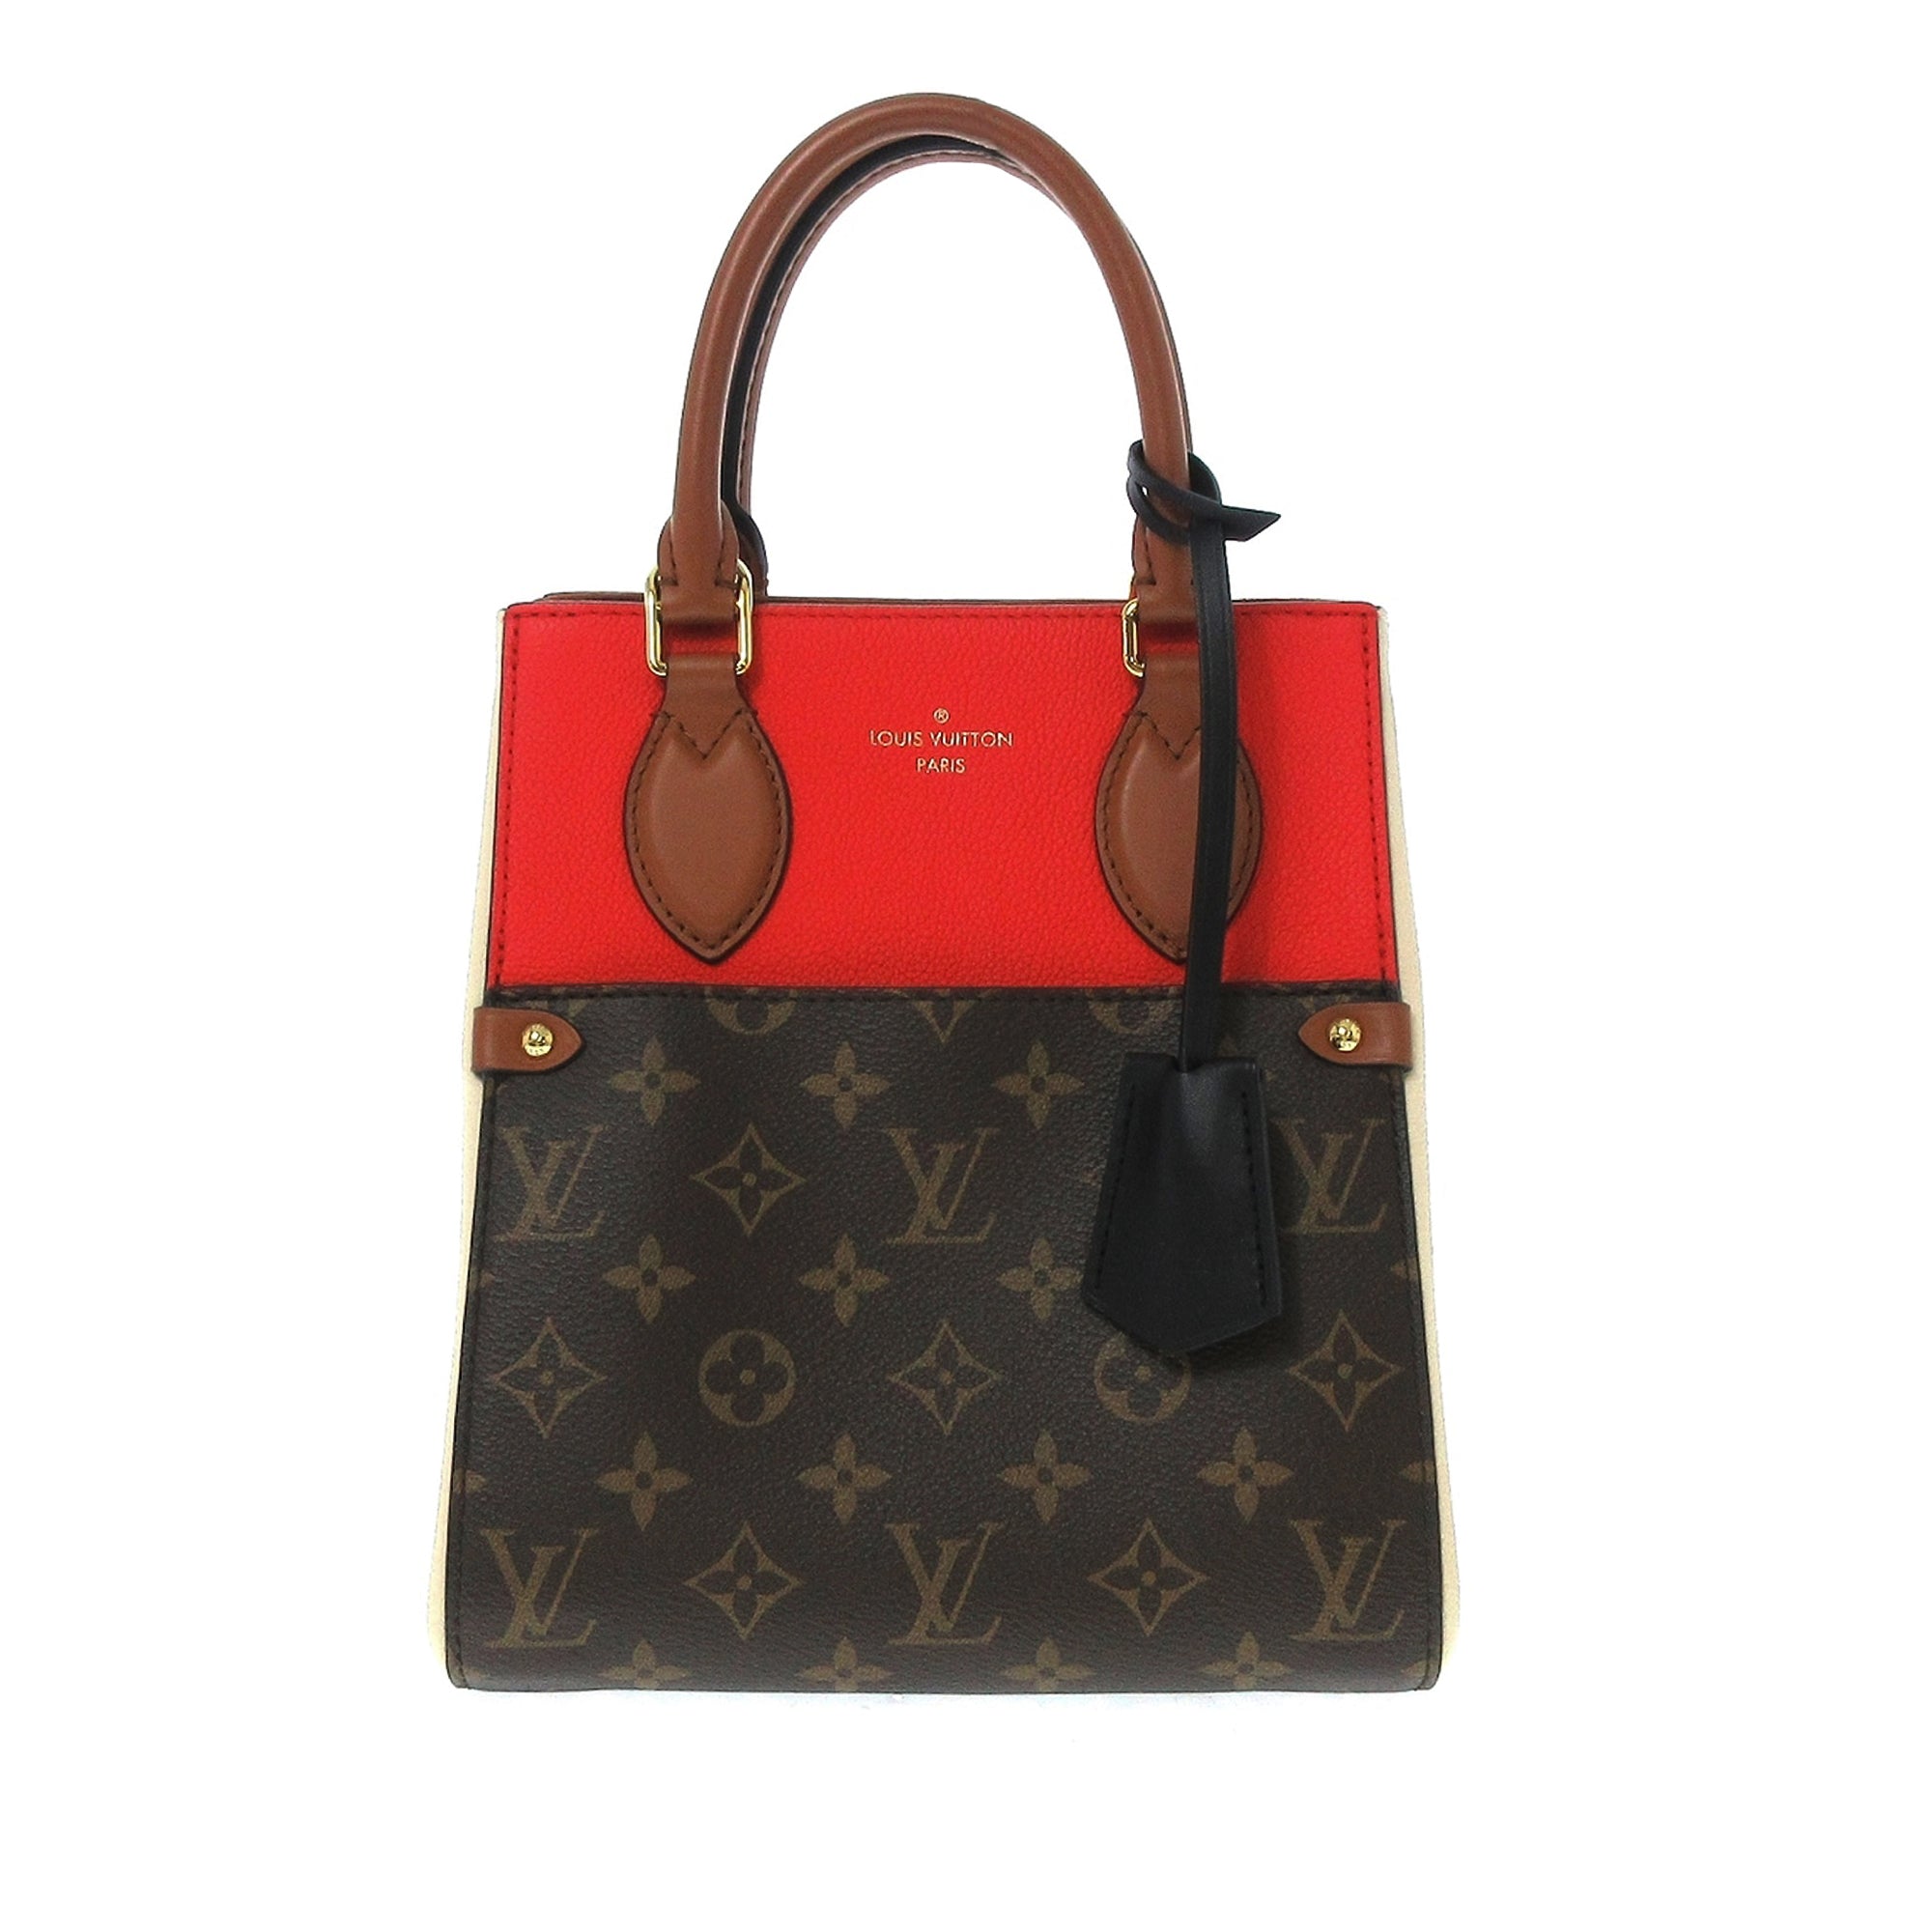 red leather louis vuitton bag